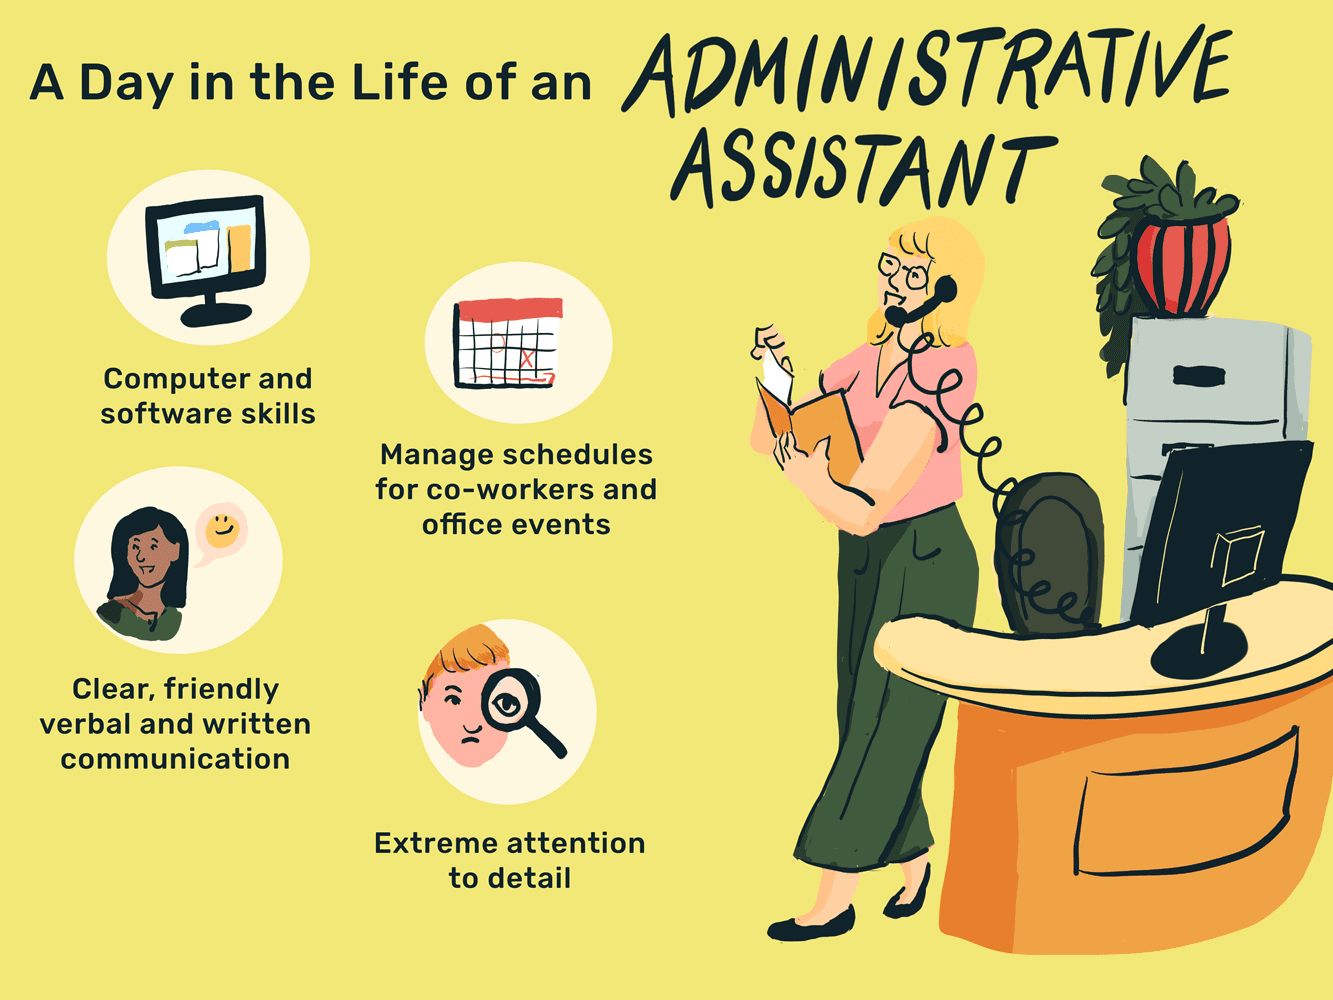 How To Get A Job As An Administrative Assistant 2060792 Final A6c4b2c7c7b44d23afb1571ee6f7e84e 